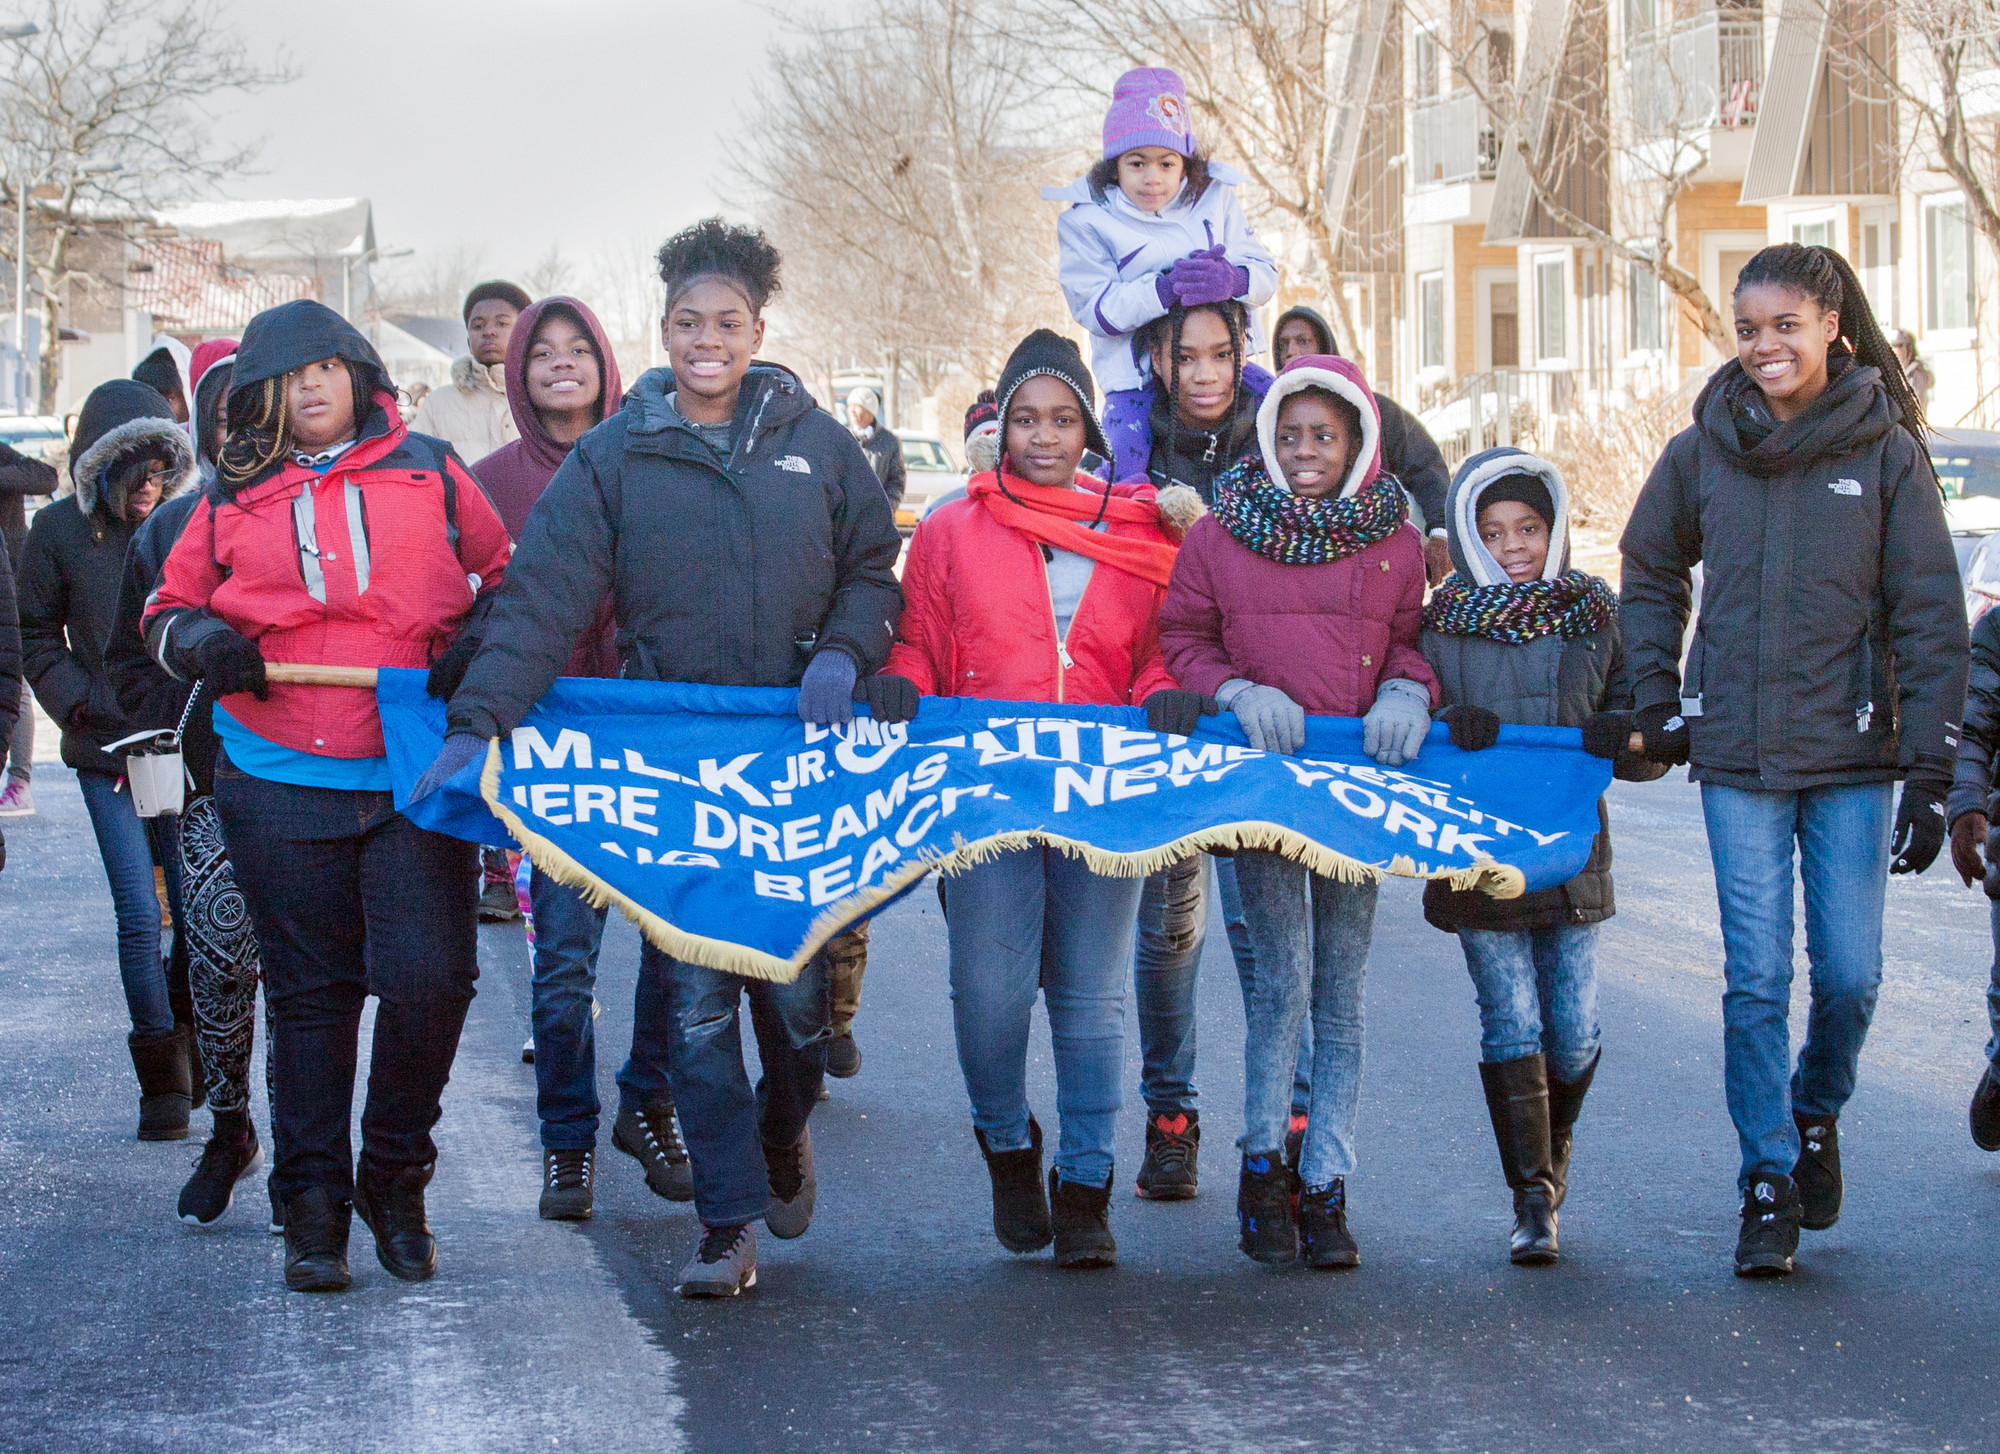 Children marched along the parade route on East Pine Street.